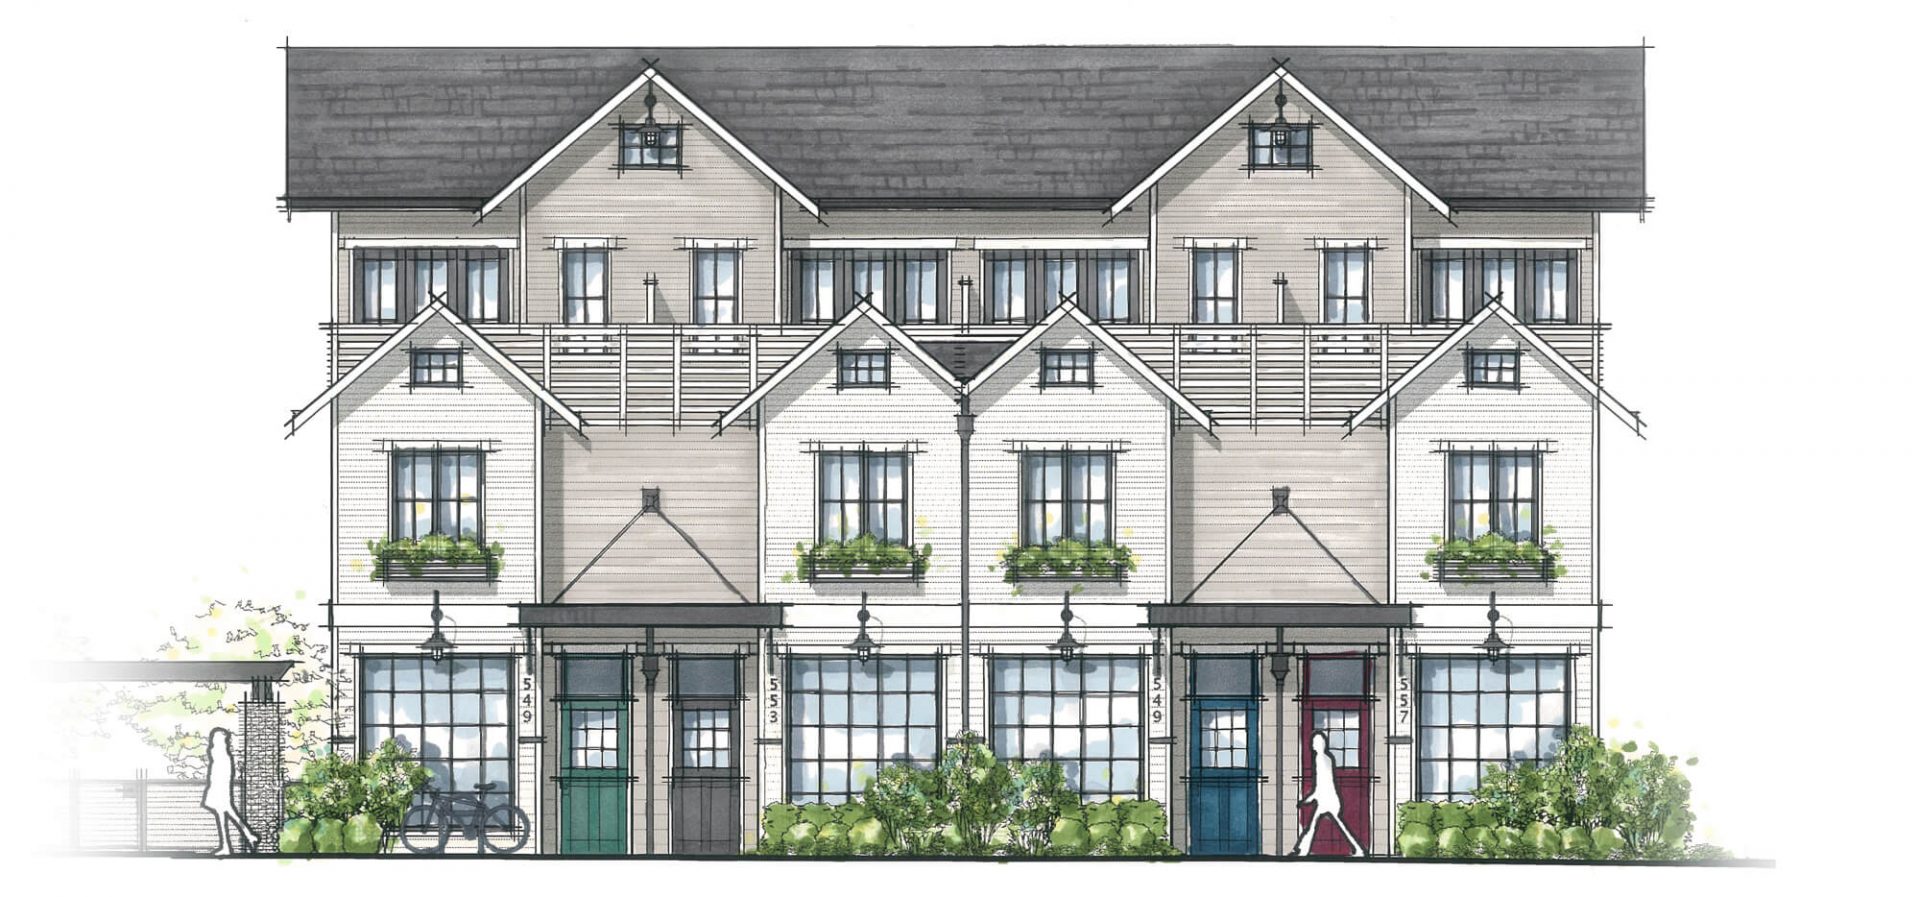 Detailed artist rendering of Dutch-style presale townhomes in North Vancouver.